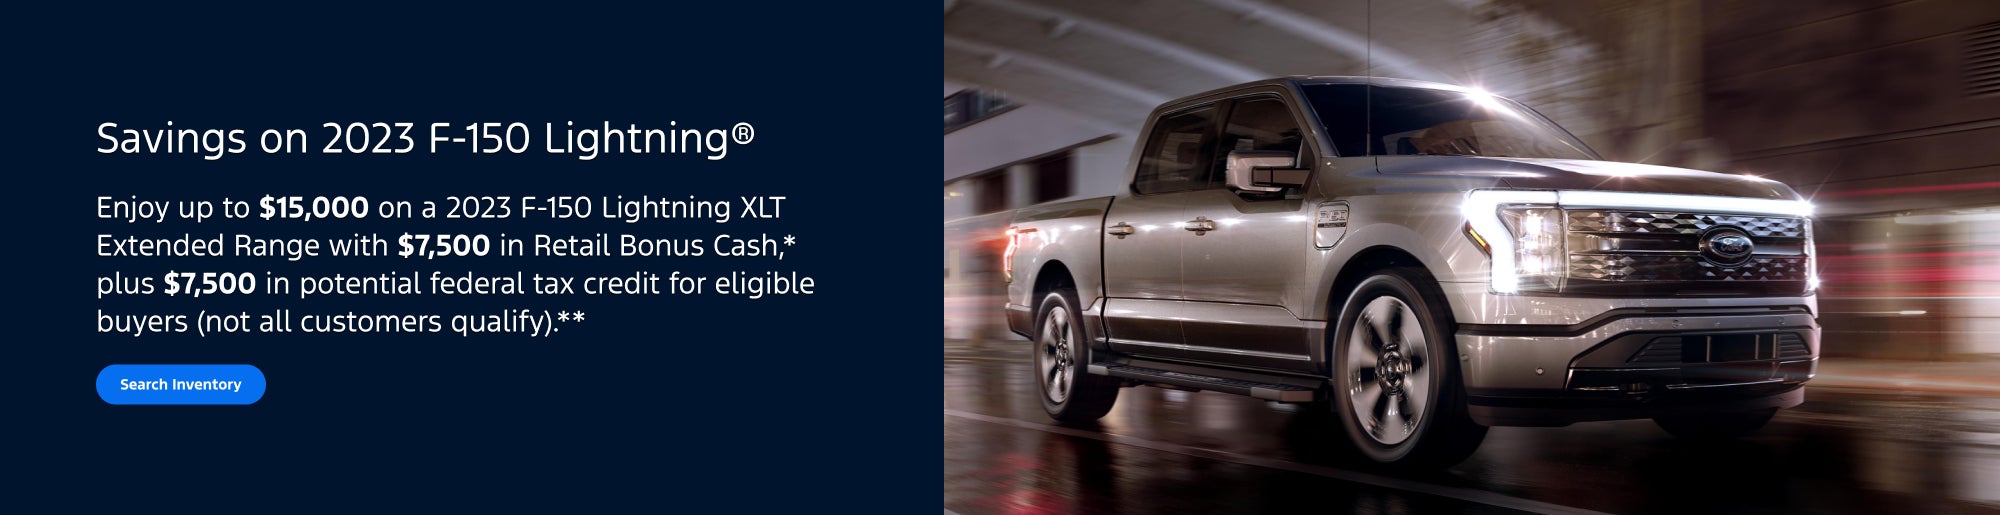 Enjoy up to $15,000 on a 2023 F-150 Lightning XLT Extended R